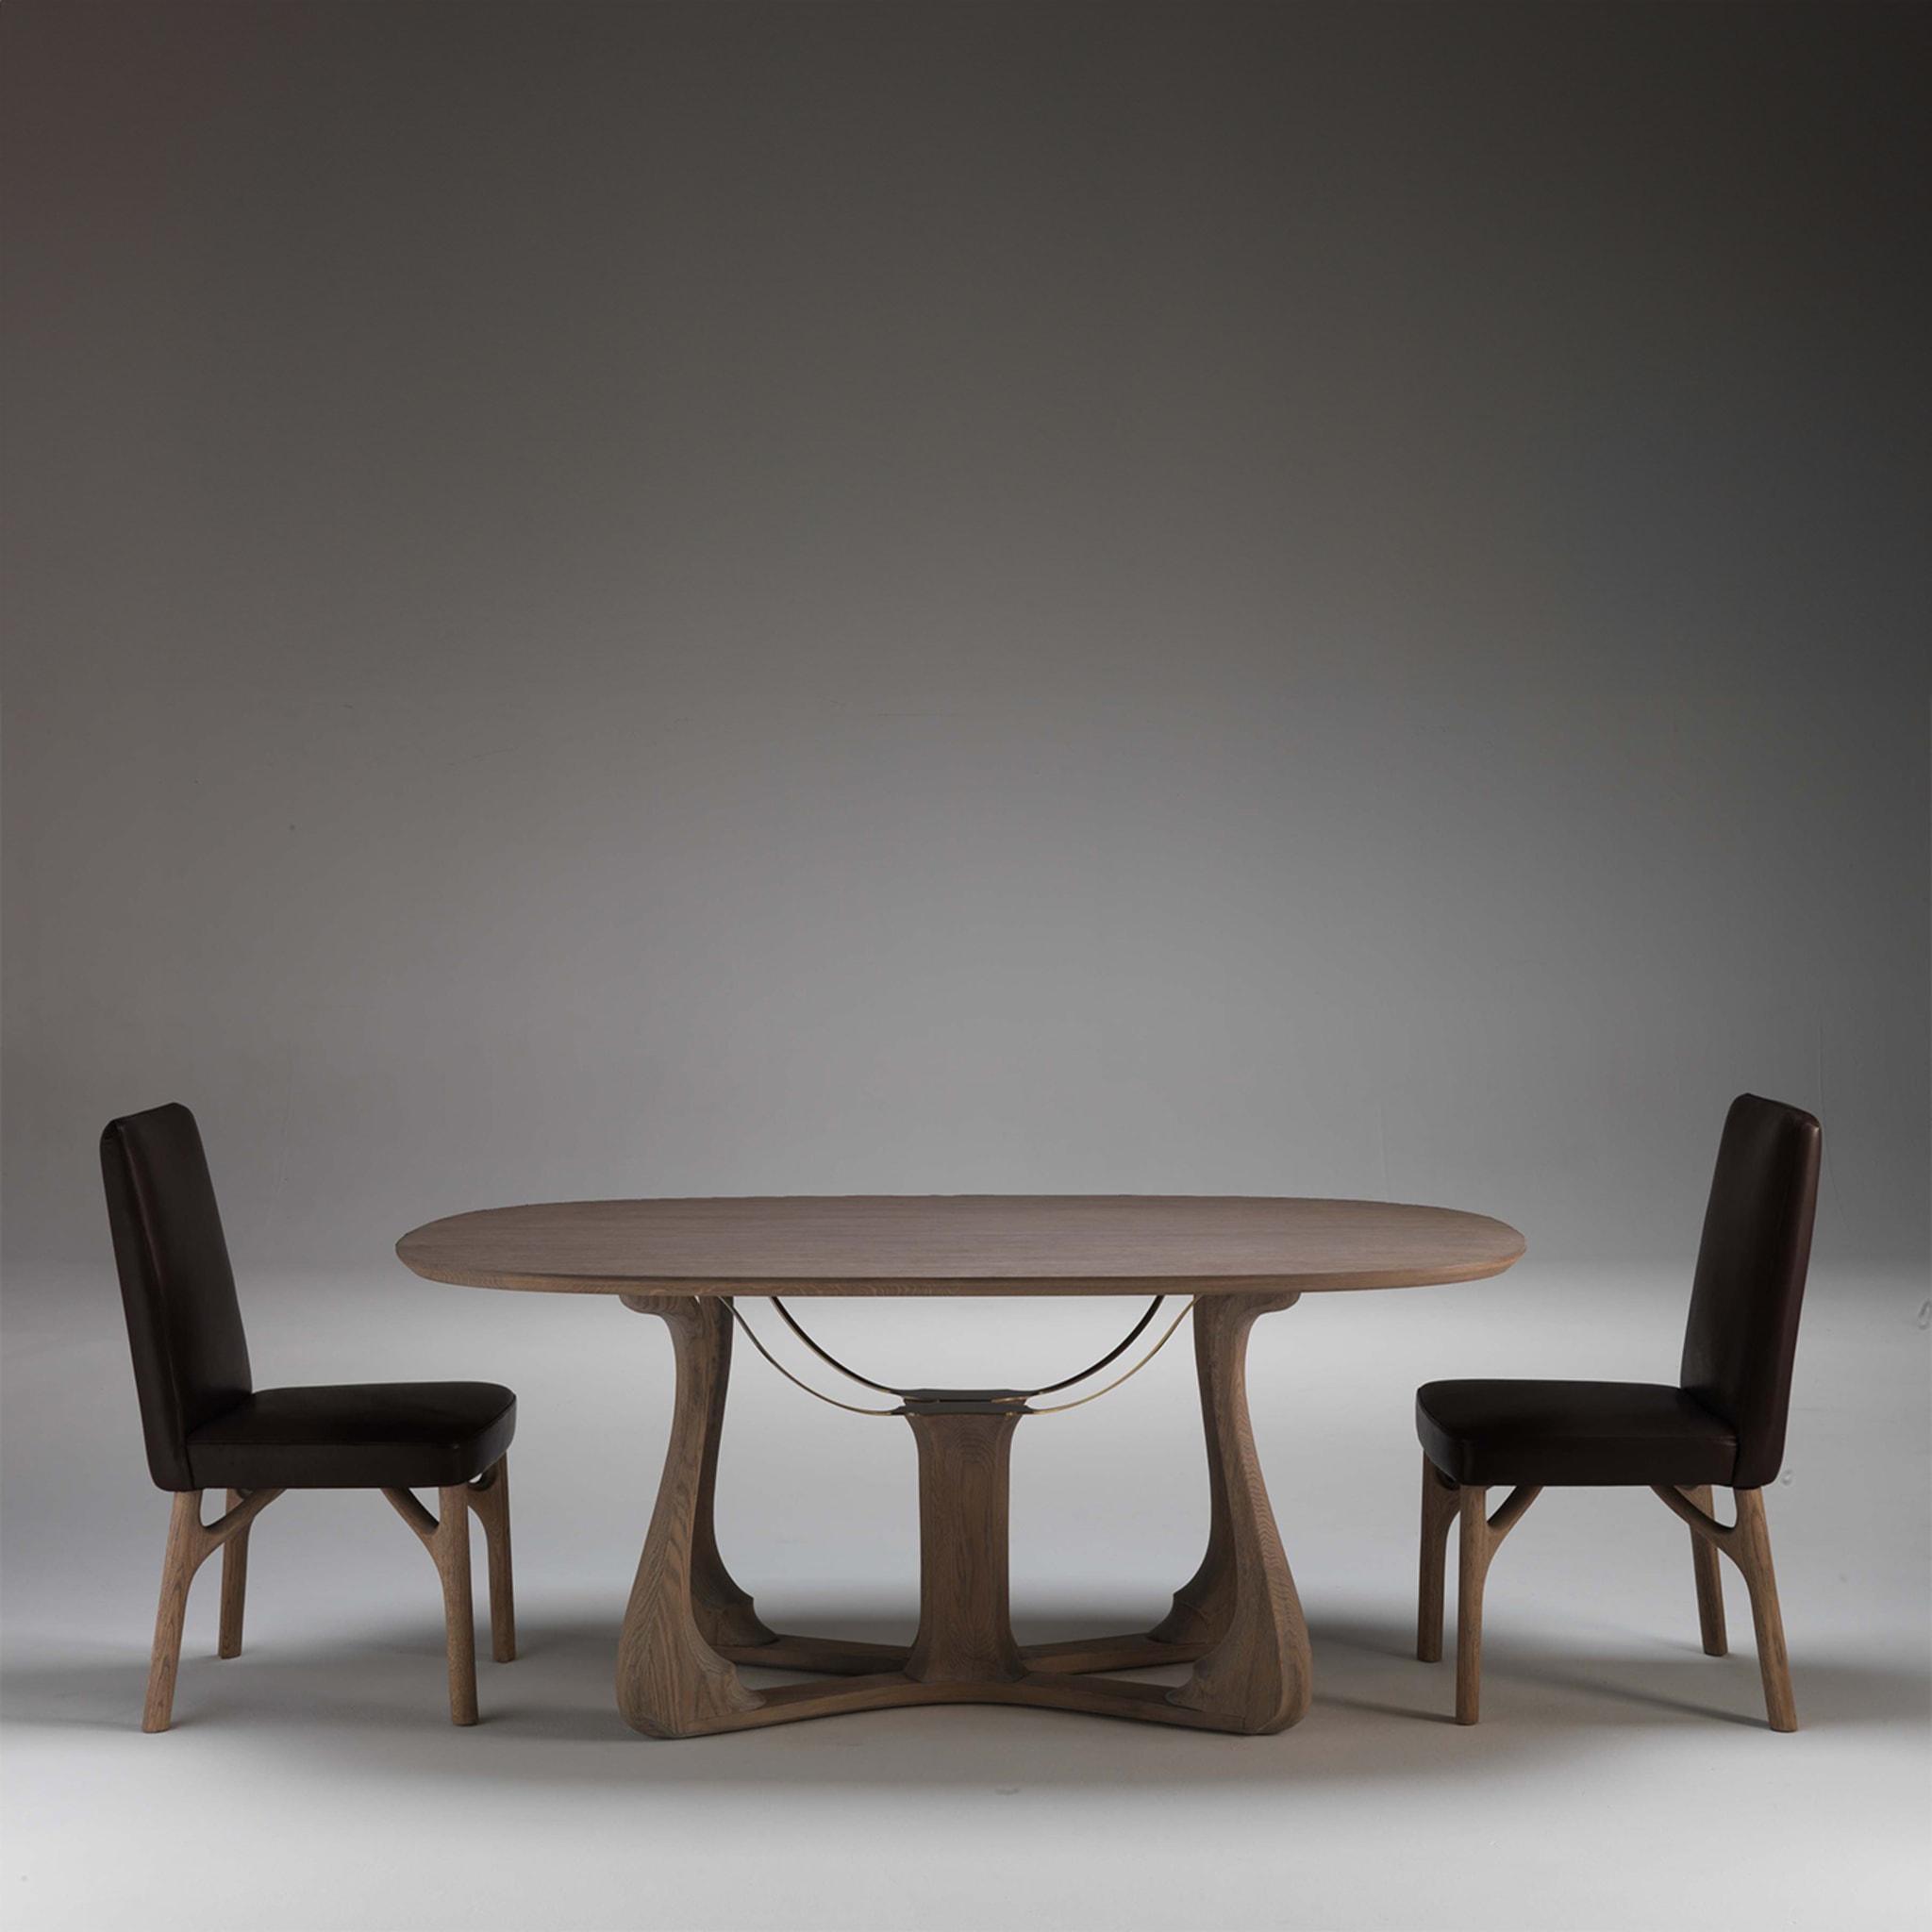 Arpa Dining Table by Giopato & Coombes - Alternative view 3